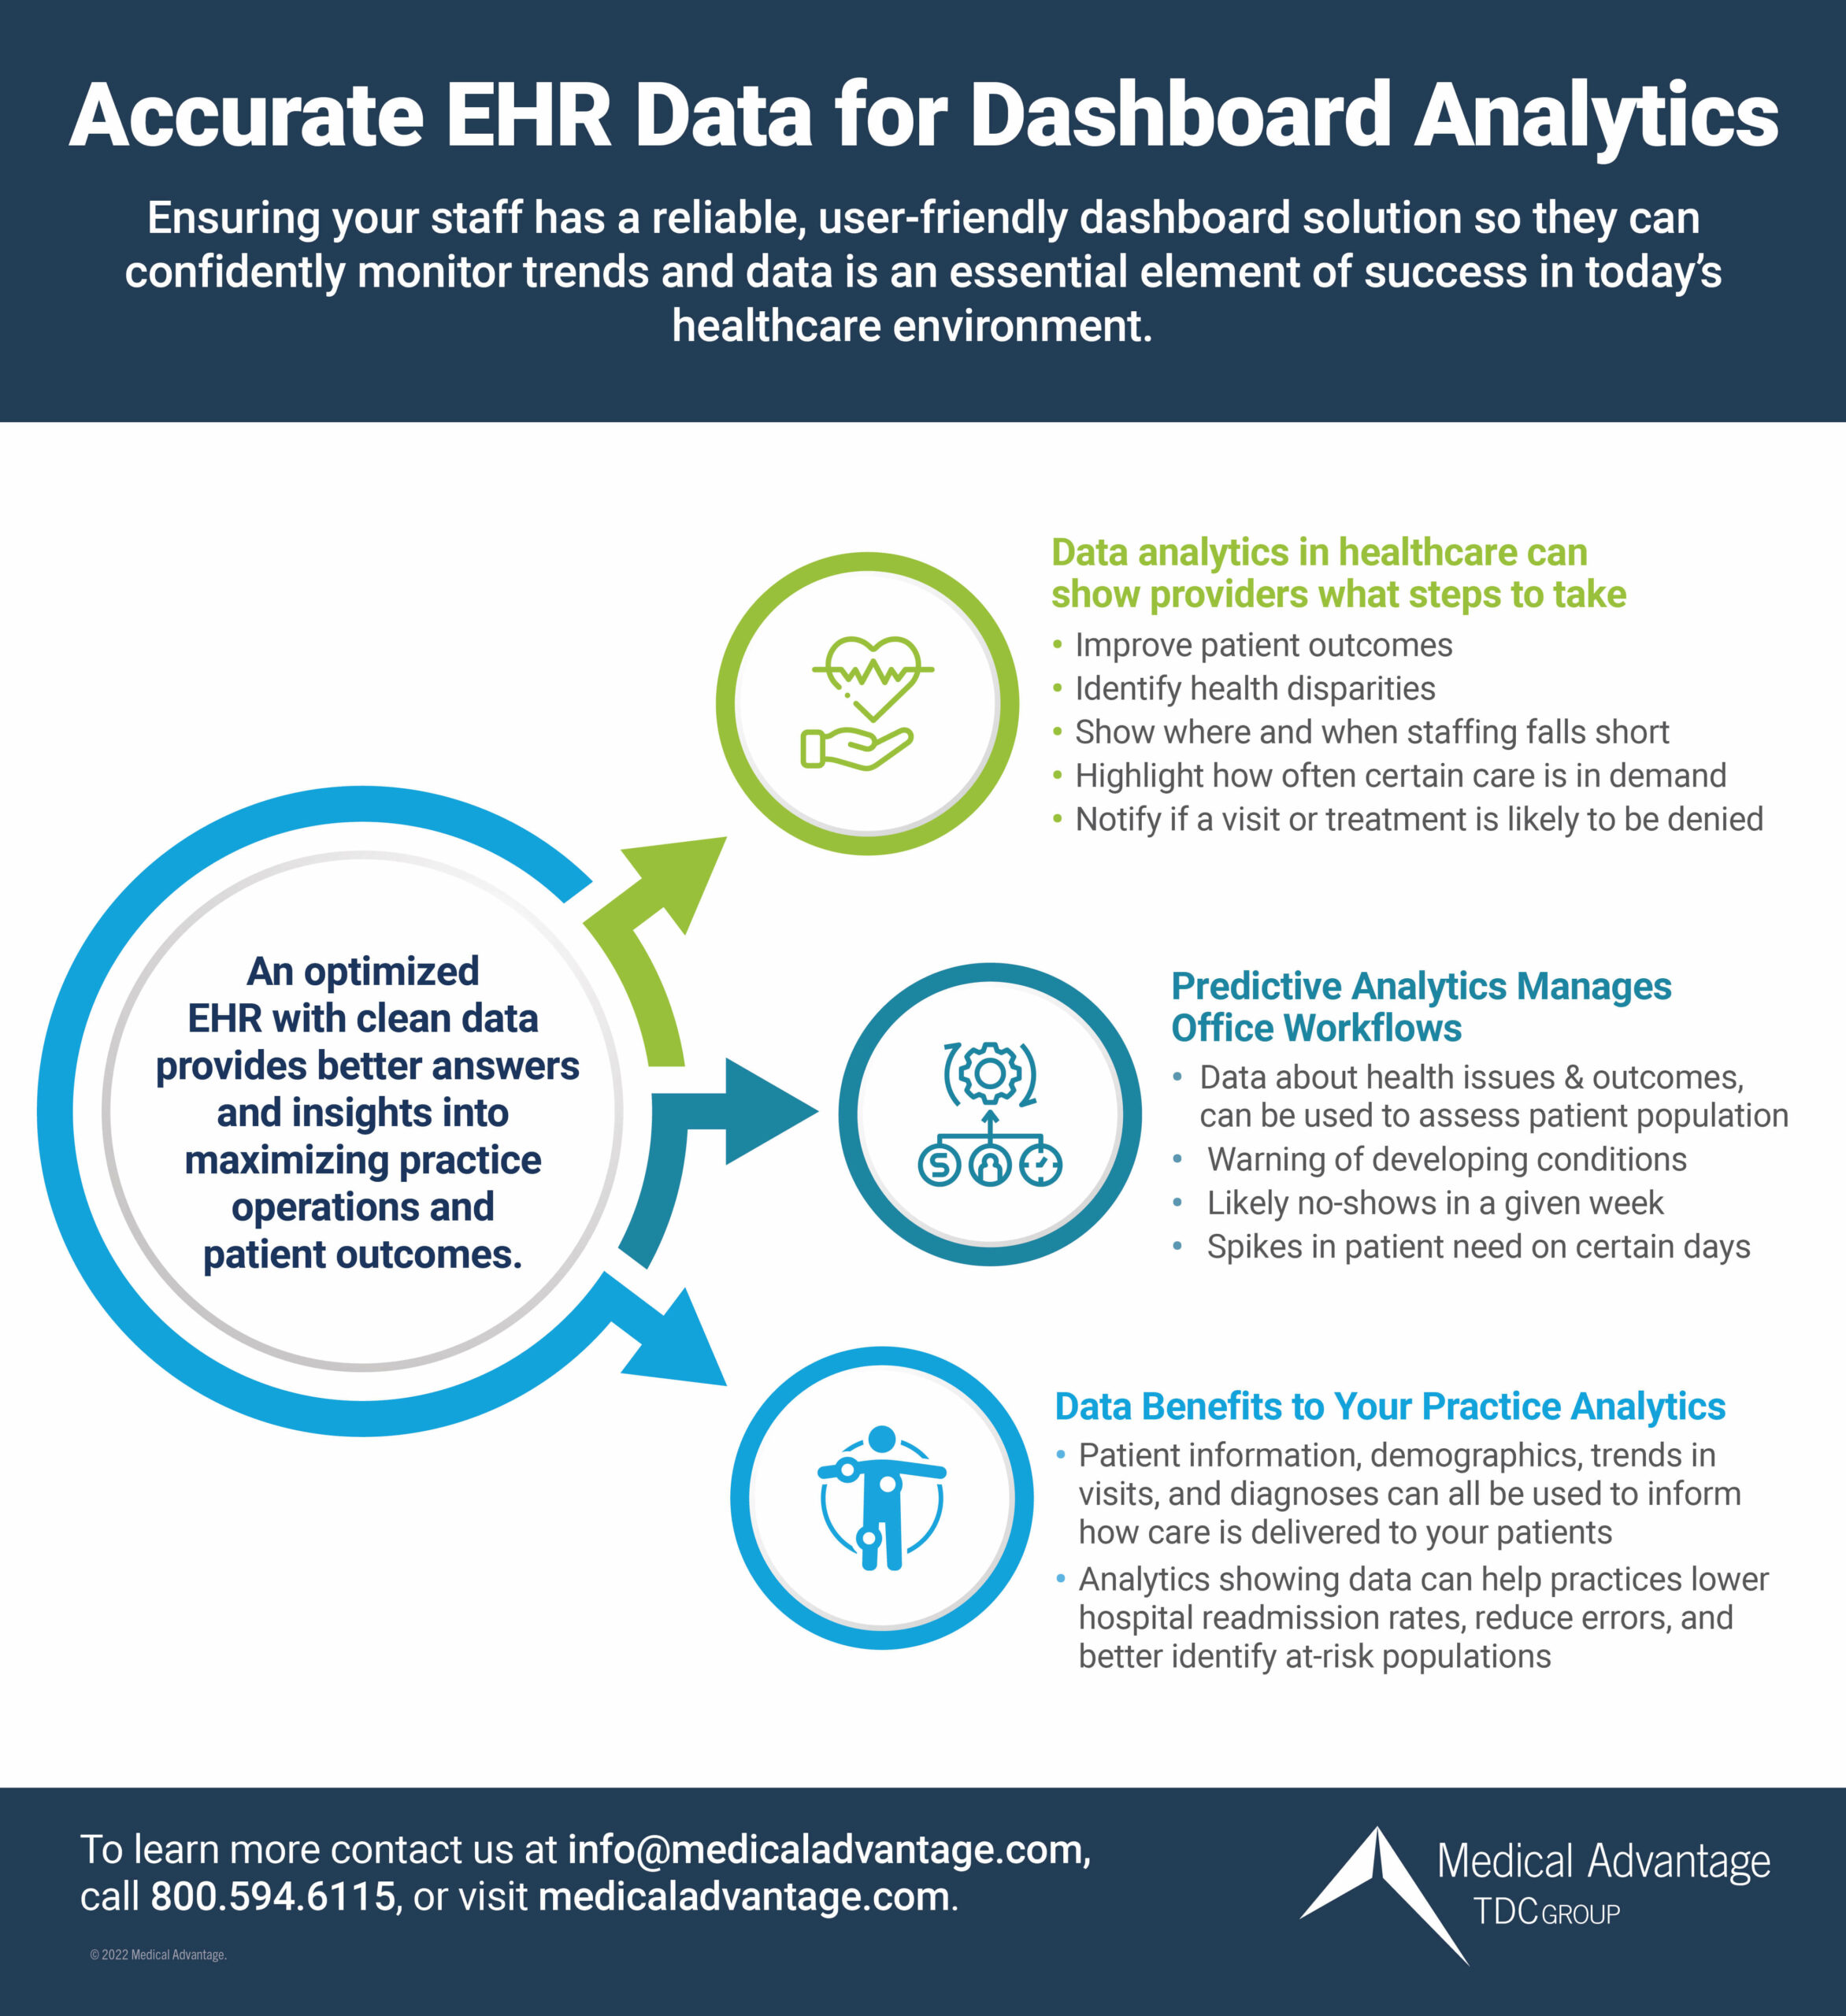 Make Sure EHR data is accurate for Dashboard Analysis